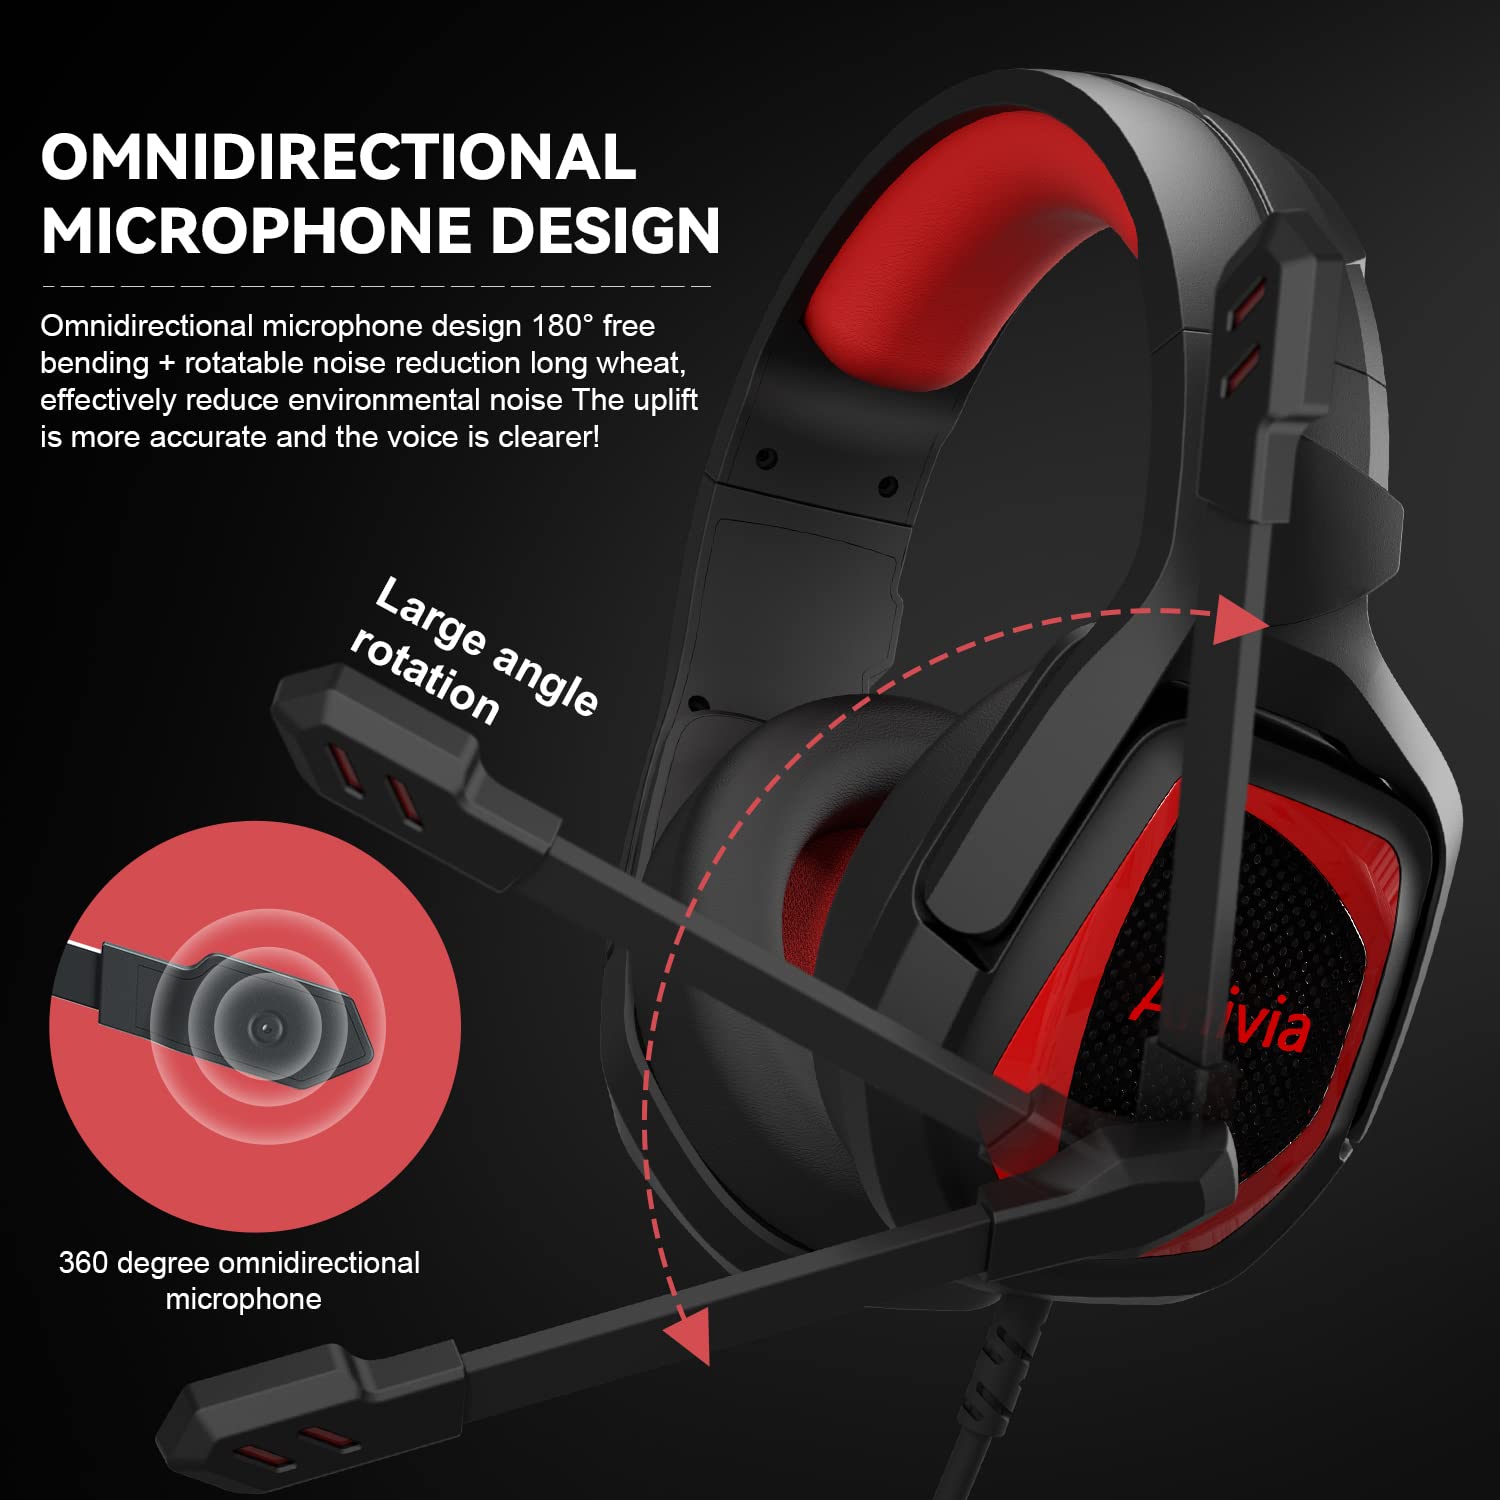 Gaming Headset Noise Cancelling Headphones with Microphone Kids and Adults 50mm Neodymium Drivers & 3.5mm Audio Jack Wired Over Ear Stereo Earphones for Online School/PC Game/Travel/Work Red